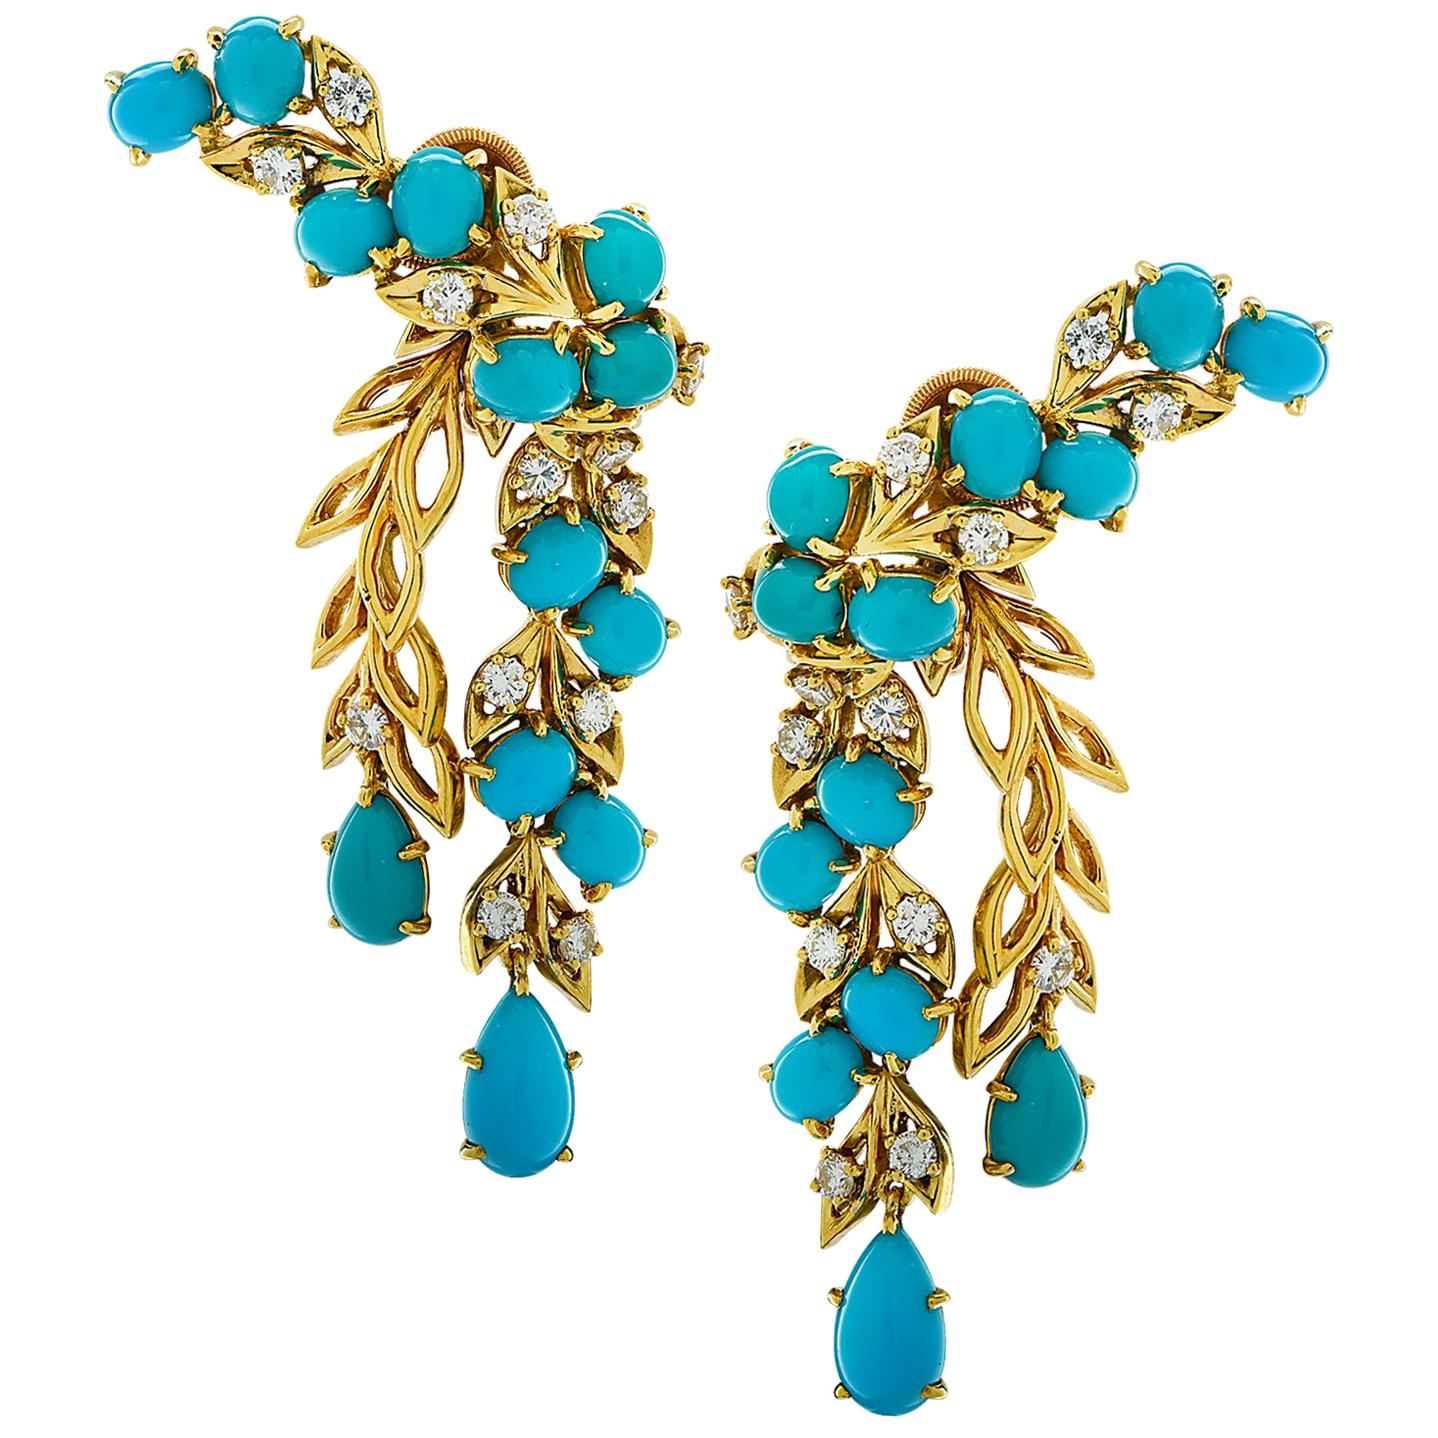 French Cartier Diamond and Turquoise Earrings, circa 1960